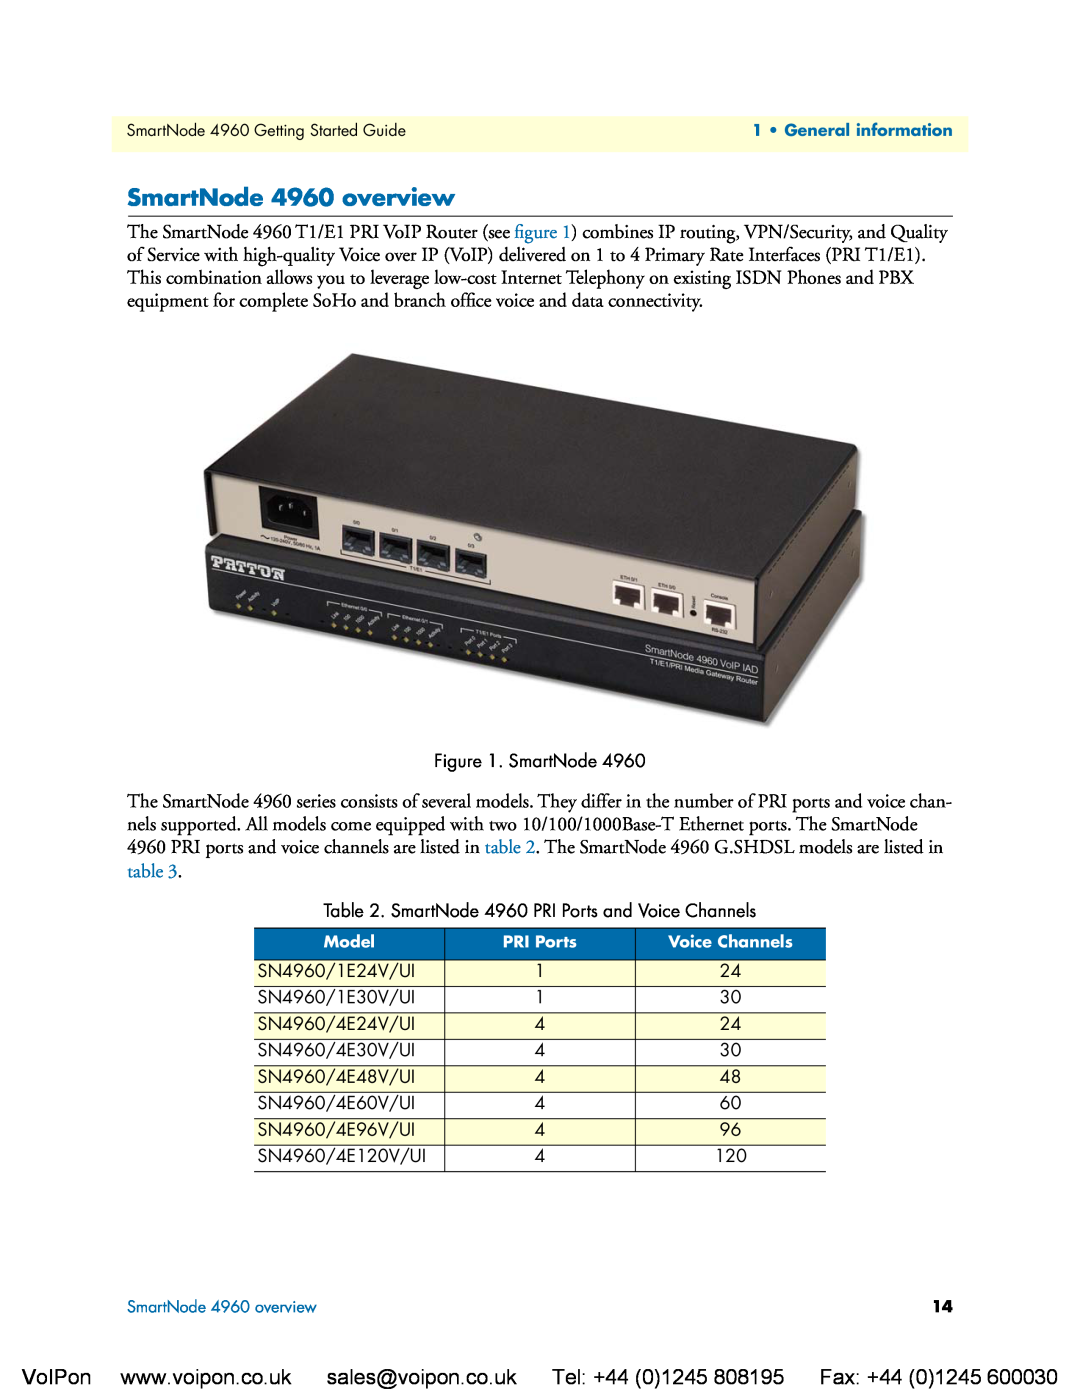 Patton electronic manual SmartNode 4960 overview 